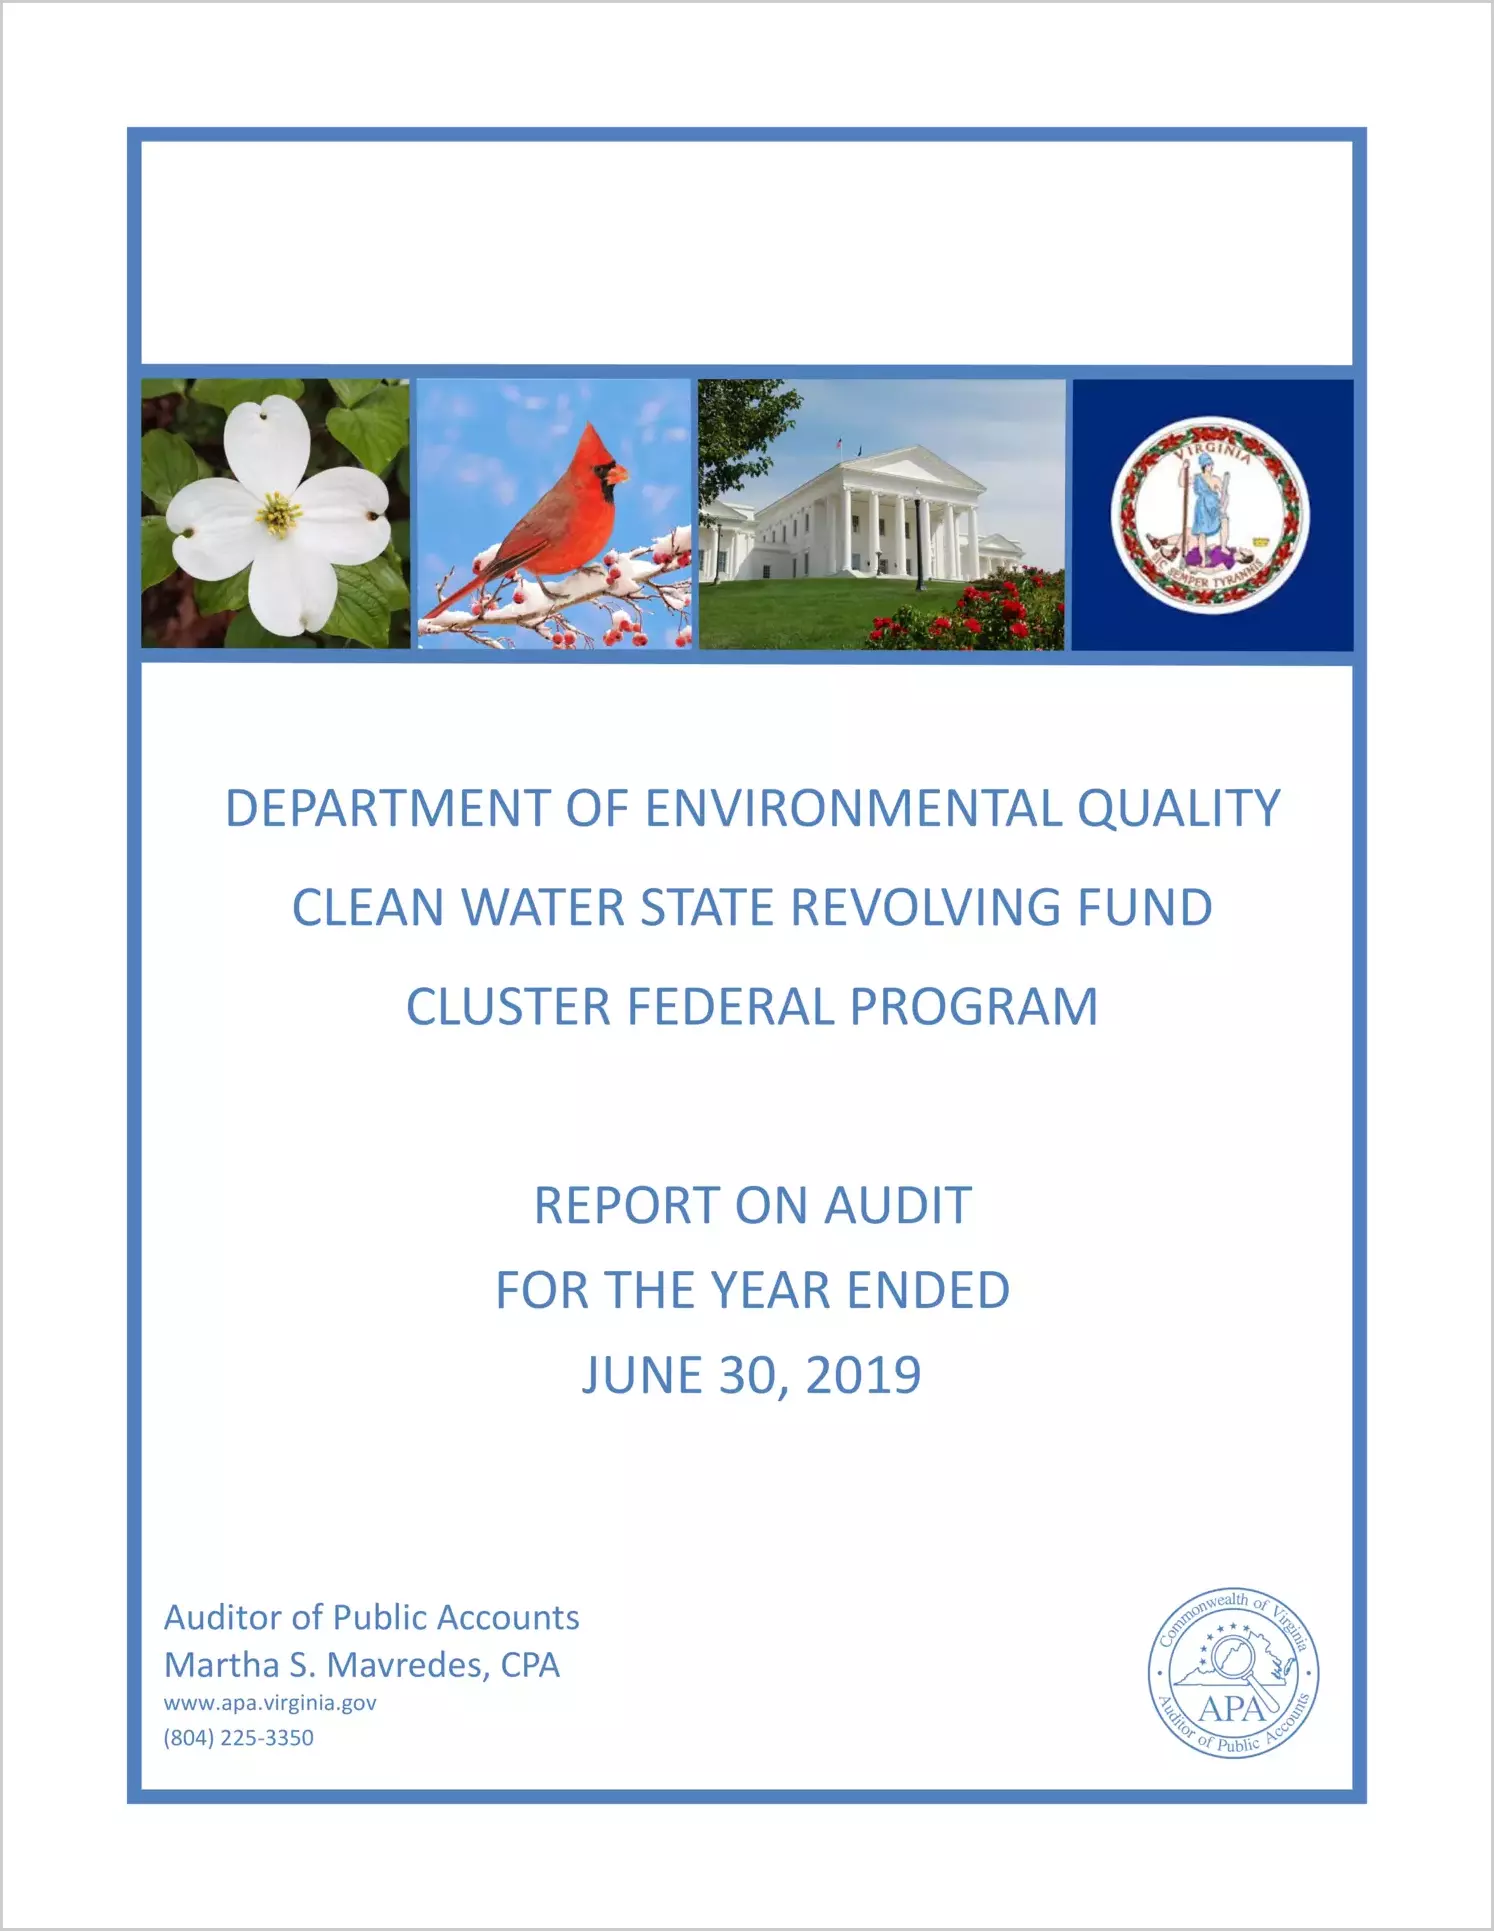 Department of Environmental Quality Clean Water State Revolving Fund Cluster Federal Program for the year ended June 30, 2019